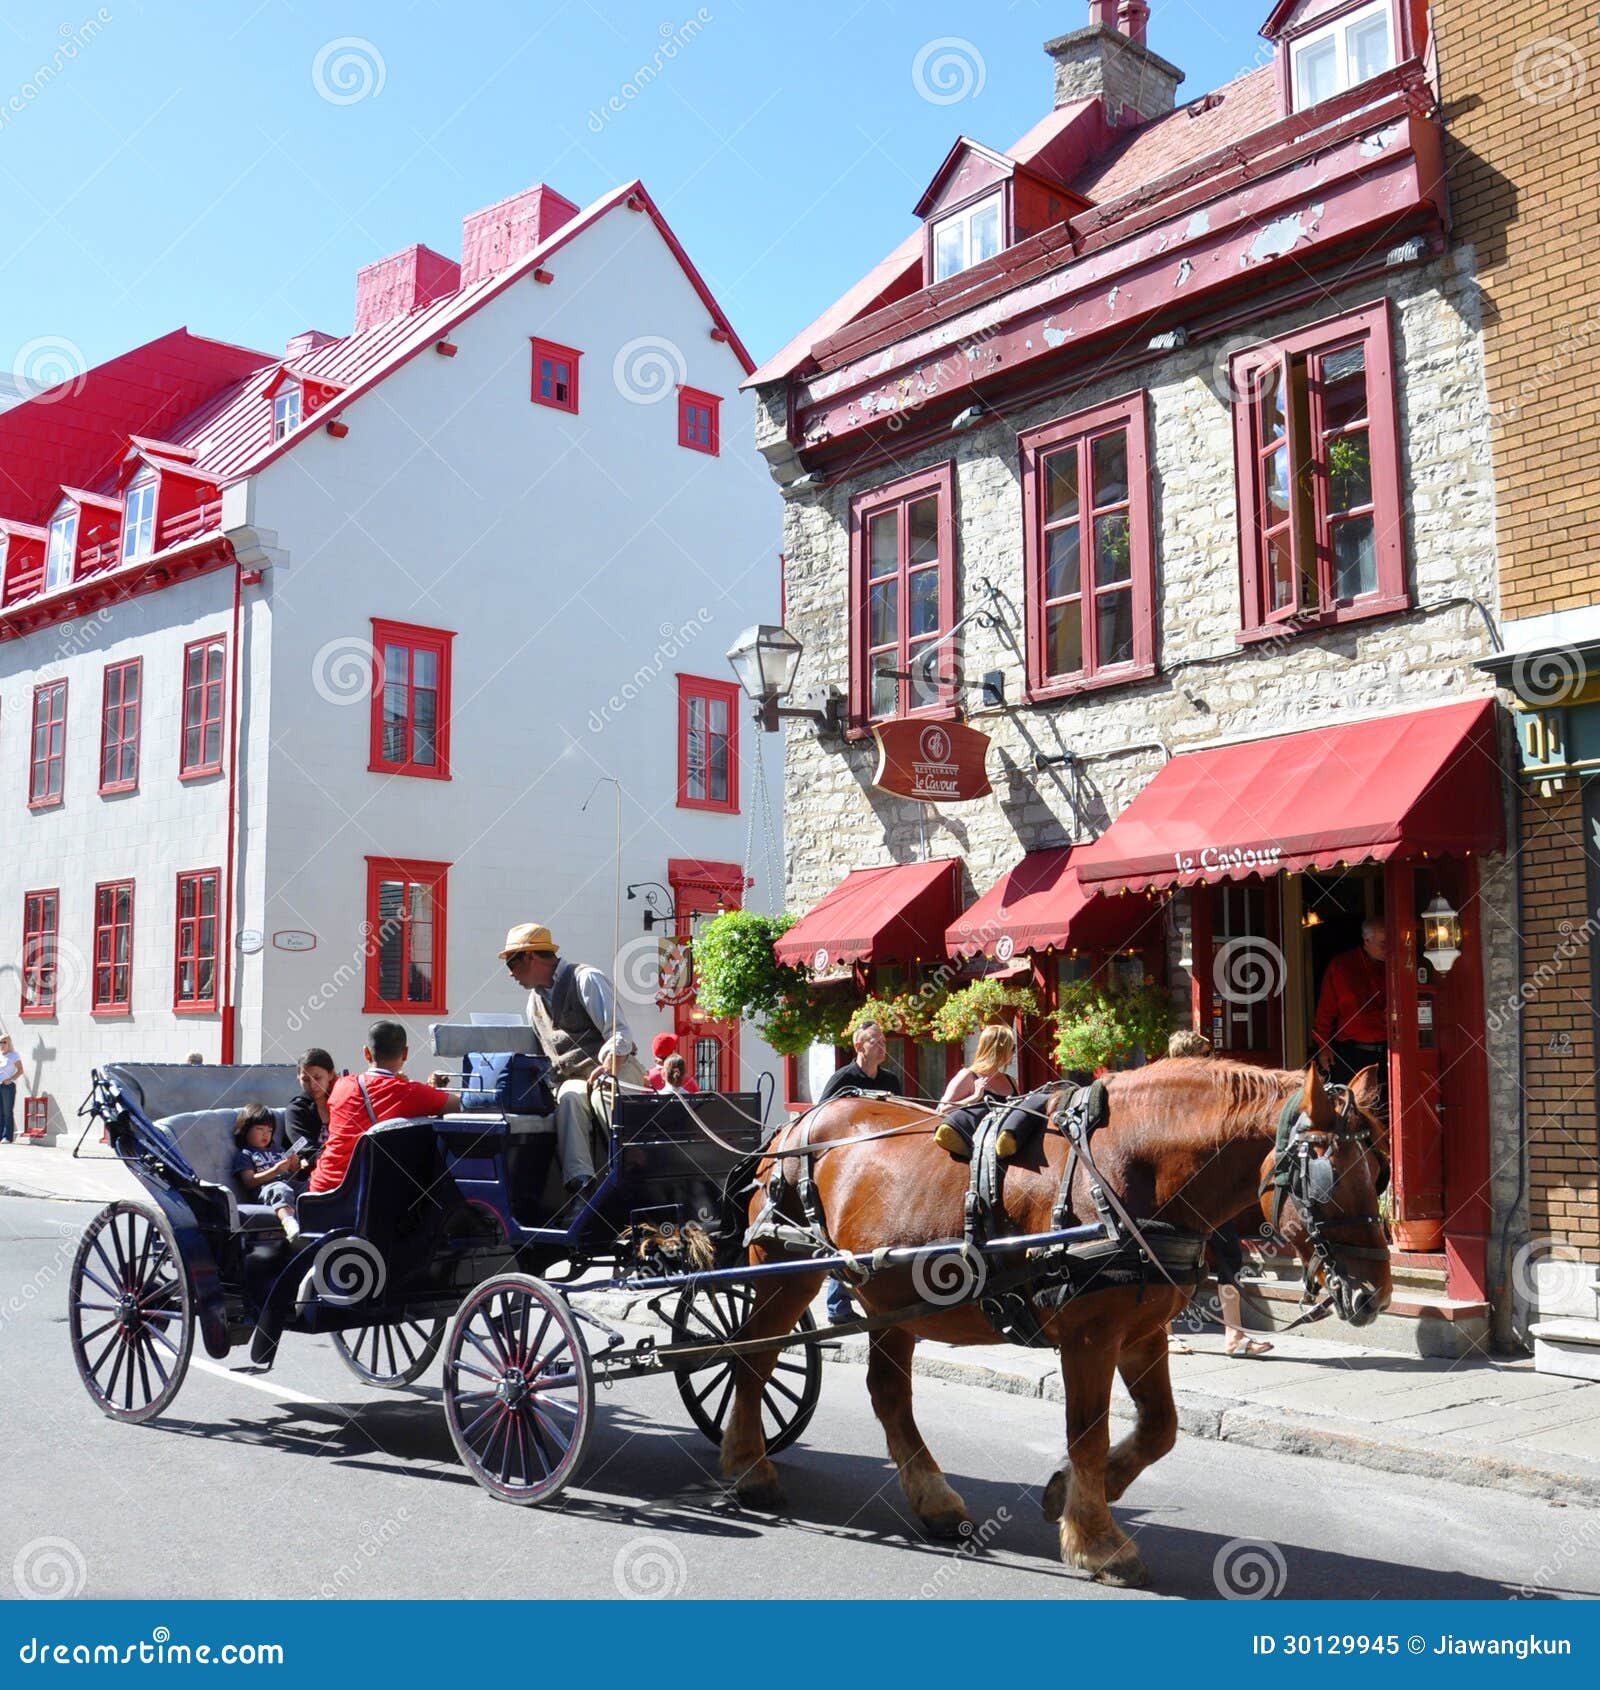 Horse Drawn Carriage Tours In Quebec City Editorial Image - Image of attraction, drawn: 30129945